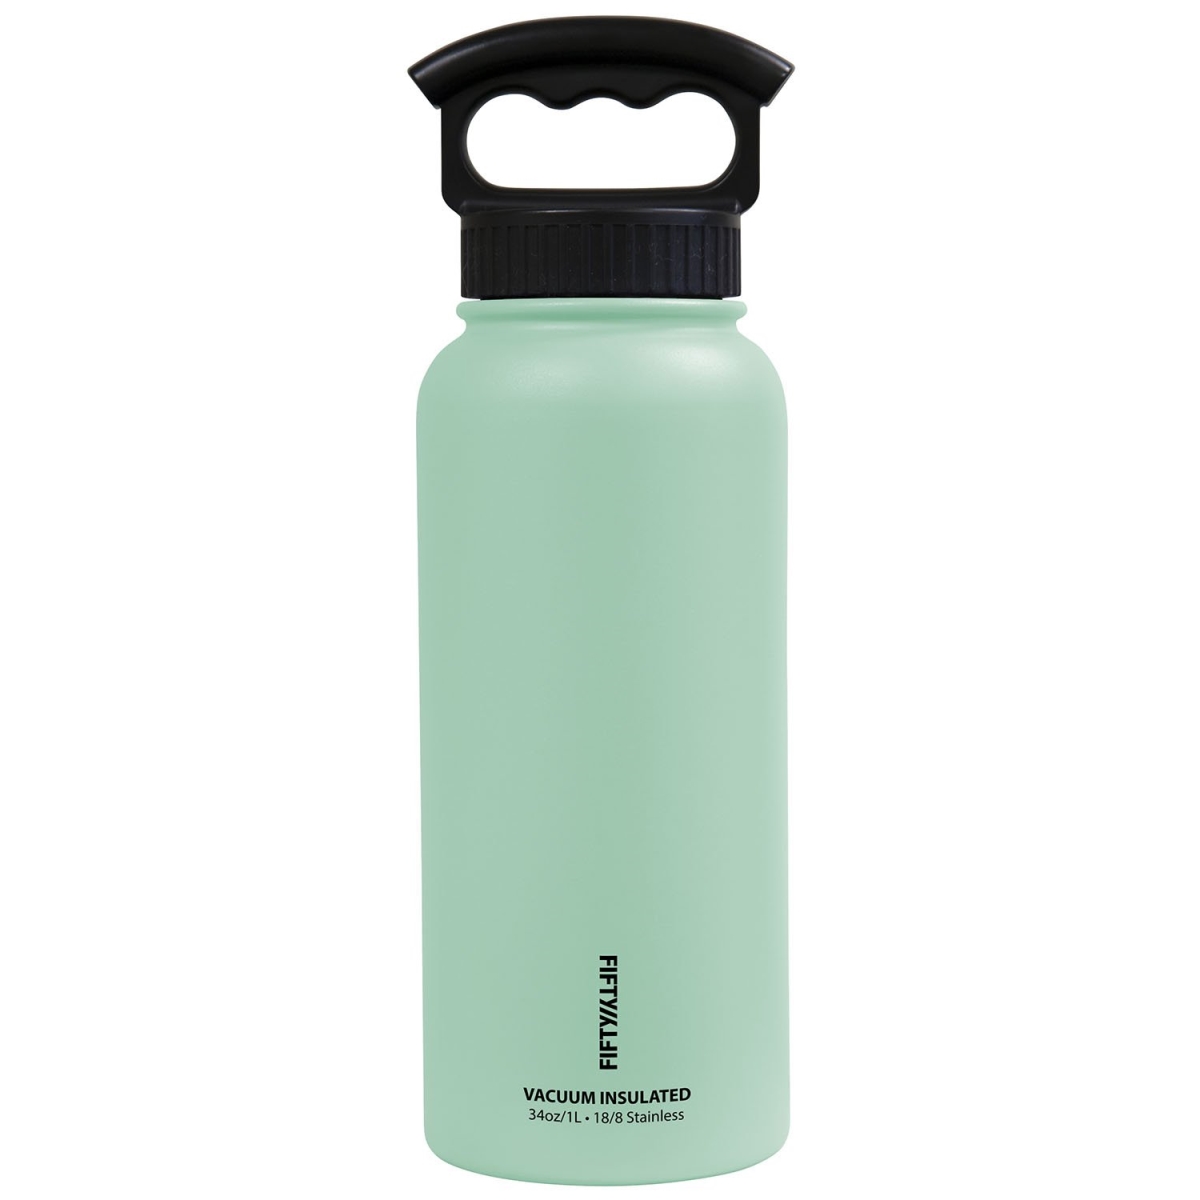 V34001mn0 34 Oz Double-wall Vacuum-insulated Bottles With 3 Finger Grip Cap, Cool Mint